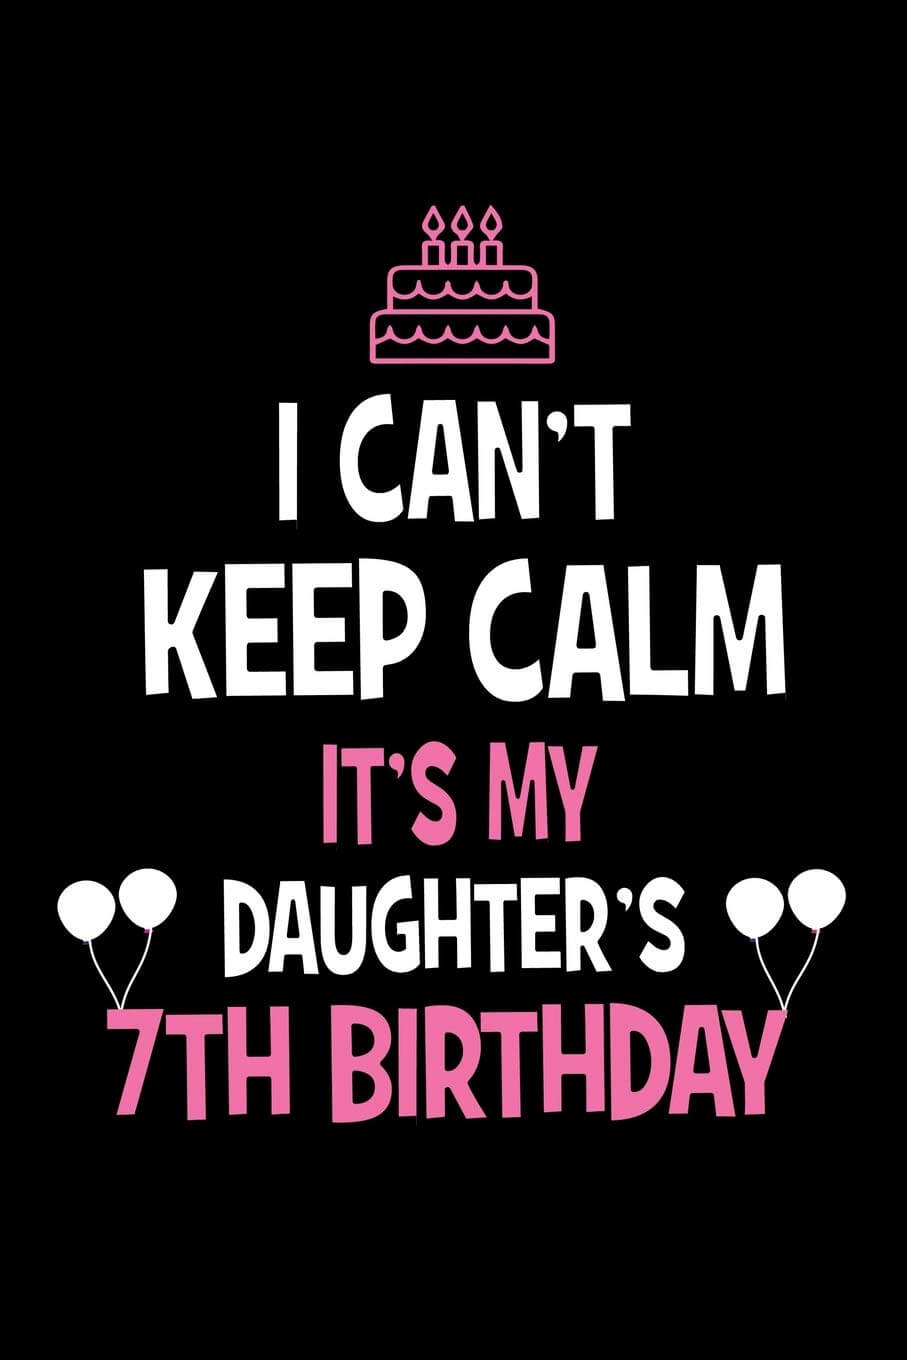 7th-birthday-wishes-for-daughter-printable-templates-free